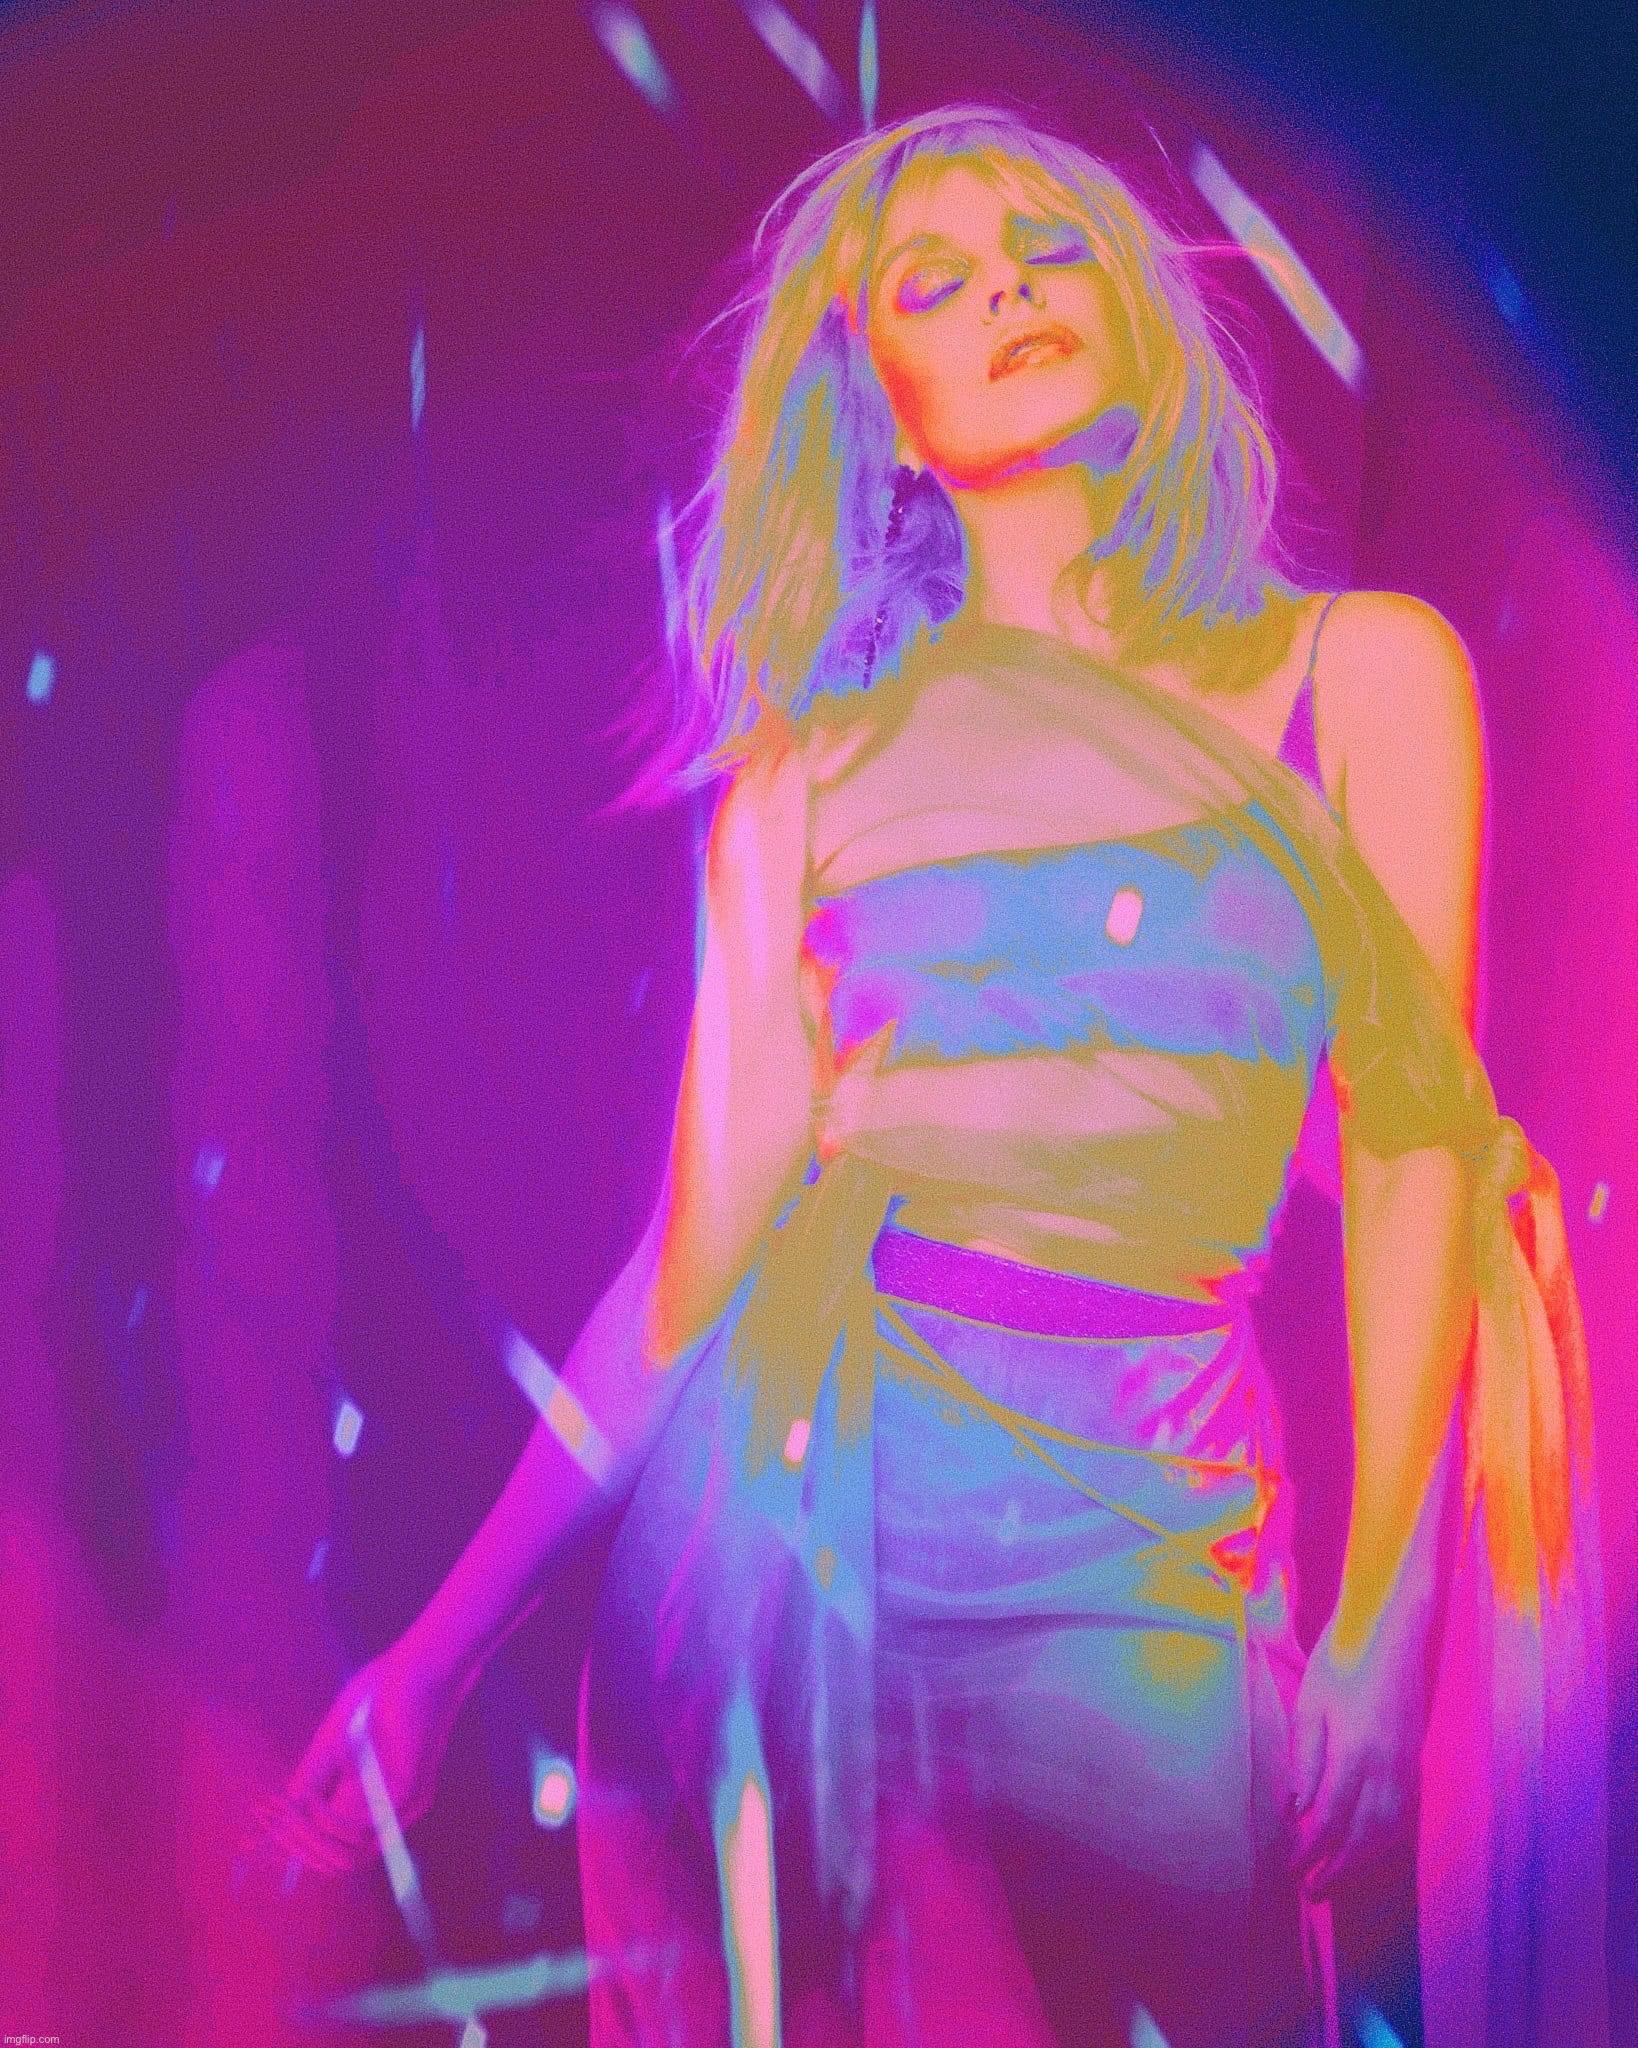 Kylie disco art | image tagged in kylie disco art | made w/ Imgflip meme maker